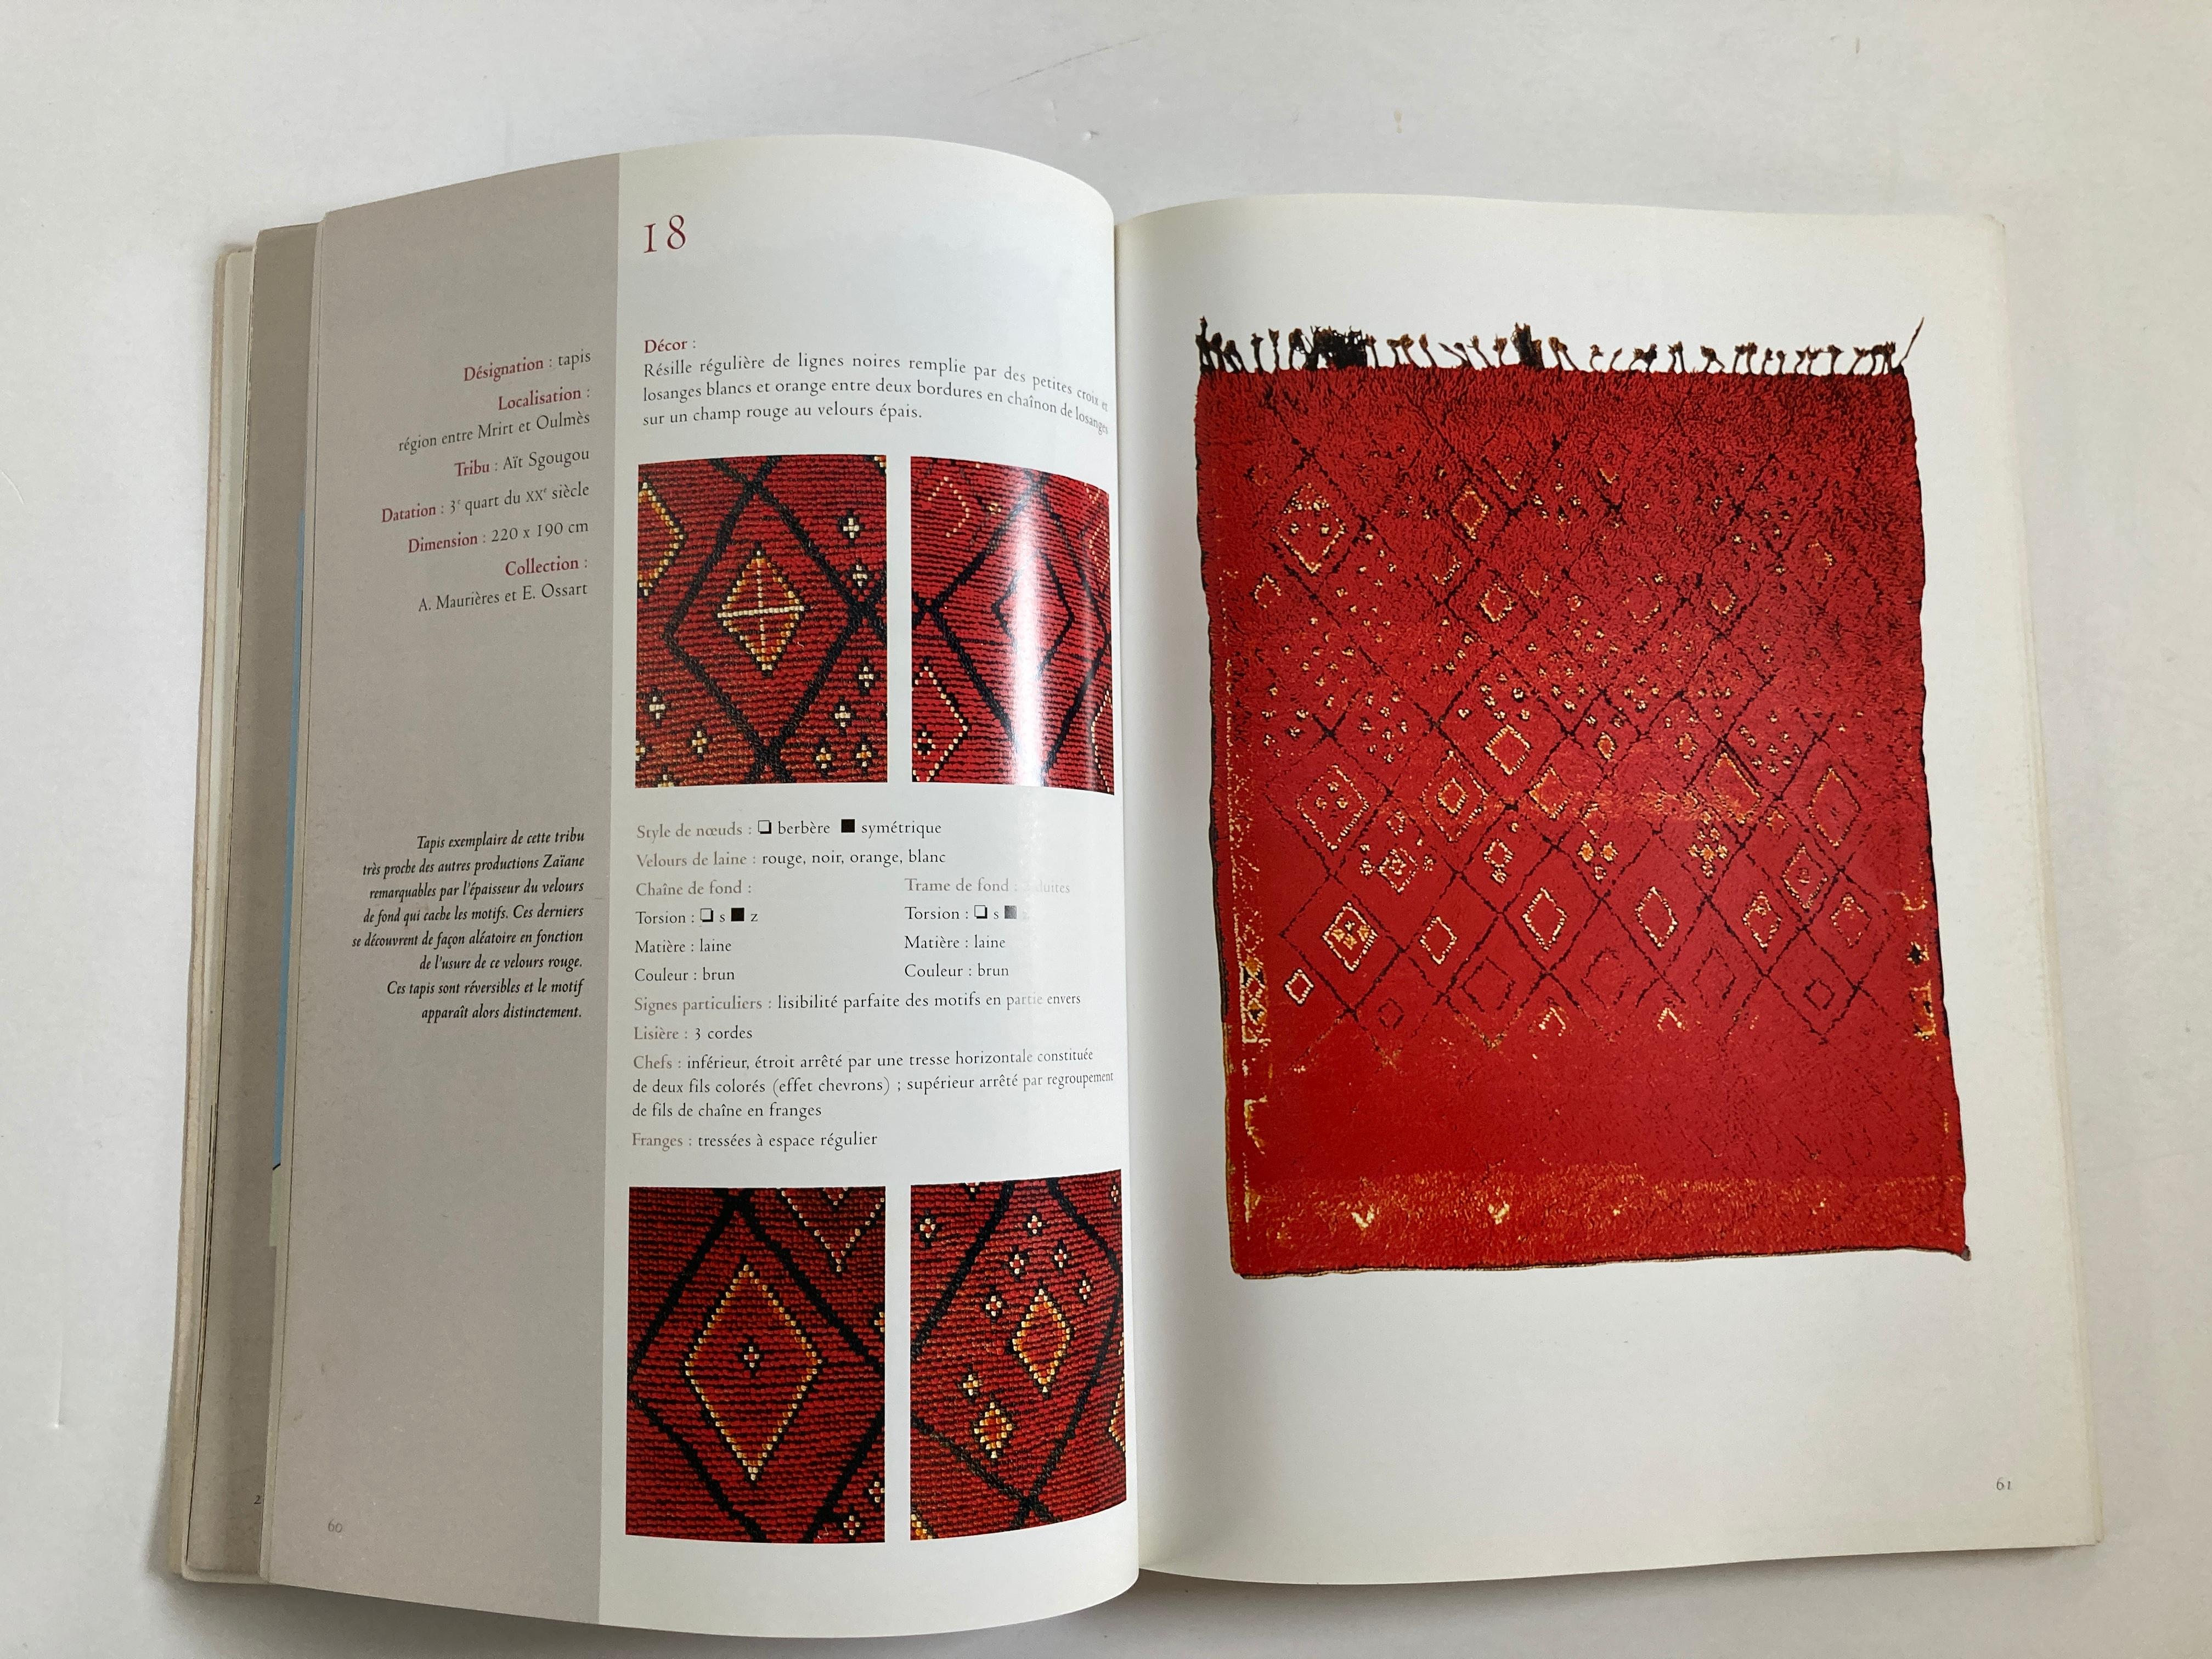 20th Century Maroc Tapis de tribus 'French' Moroccan Tribal Rugs Paperback Book For Sale